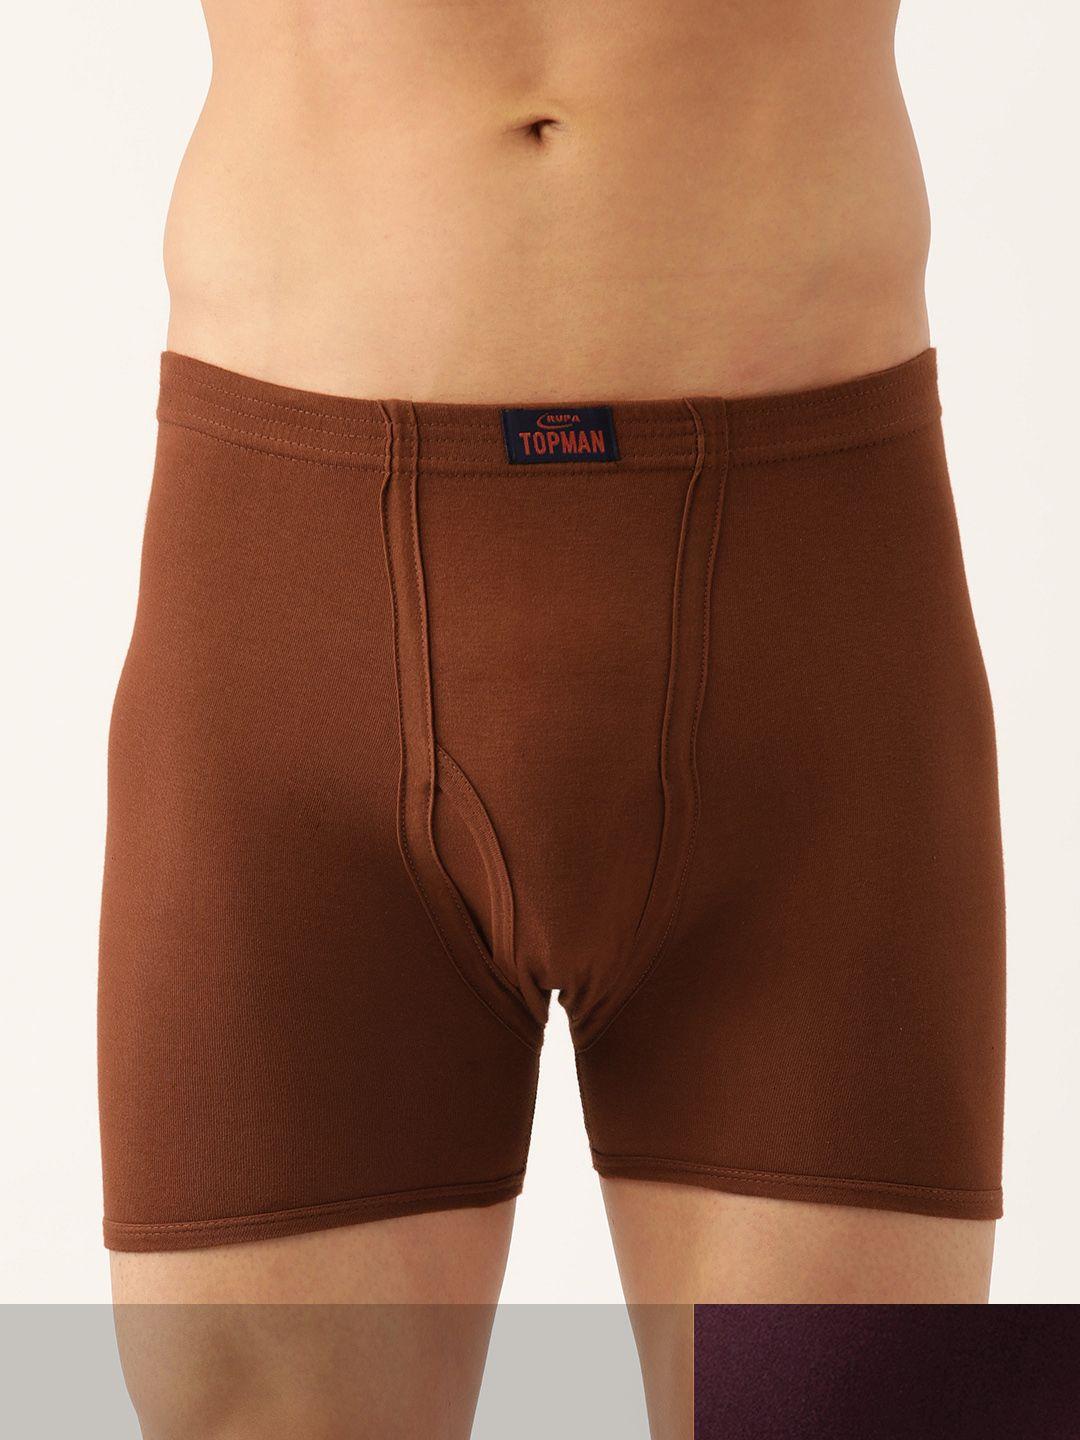 rupa men set of 2 brown & maroon solid cotton trunks